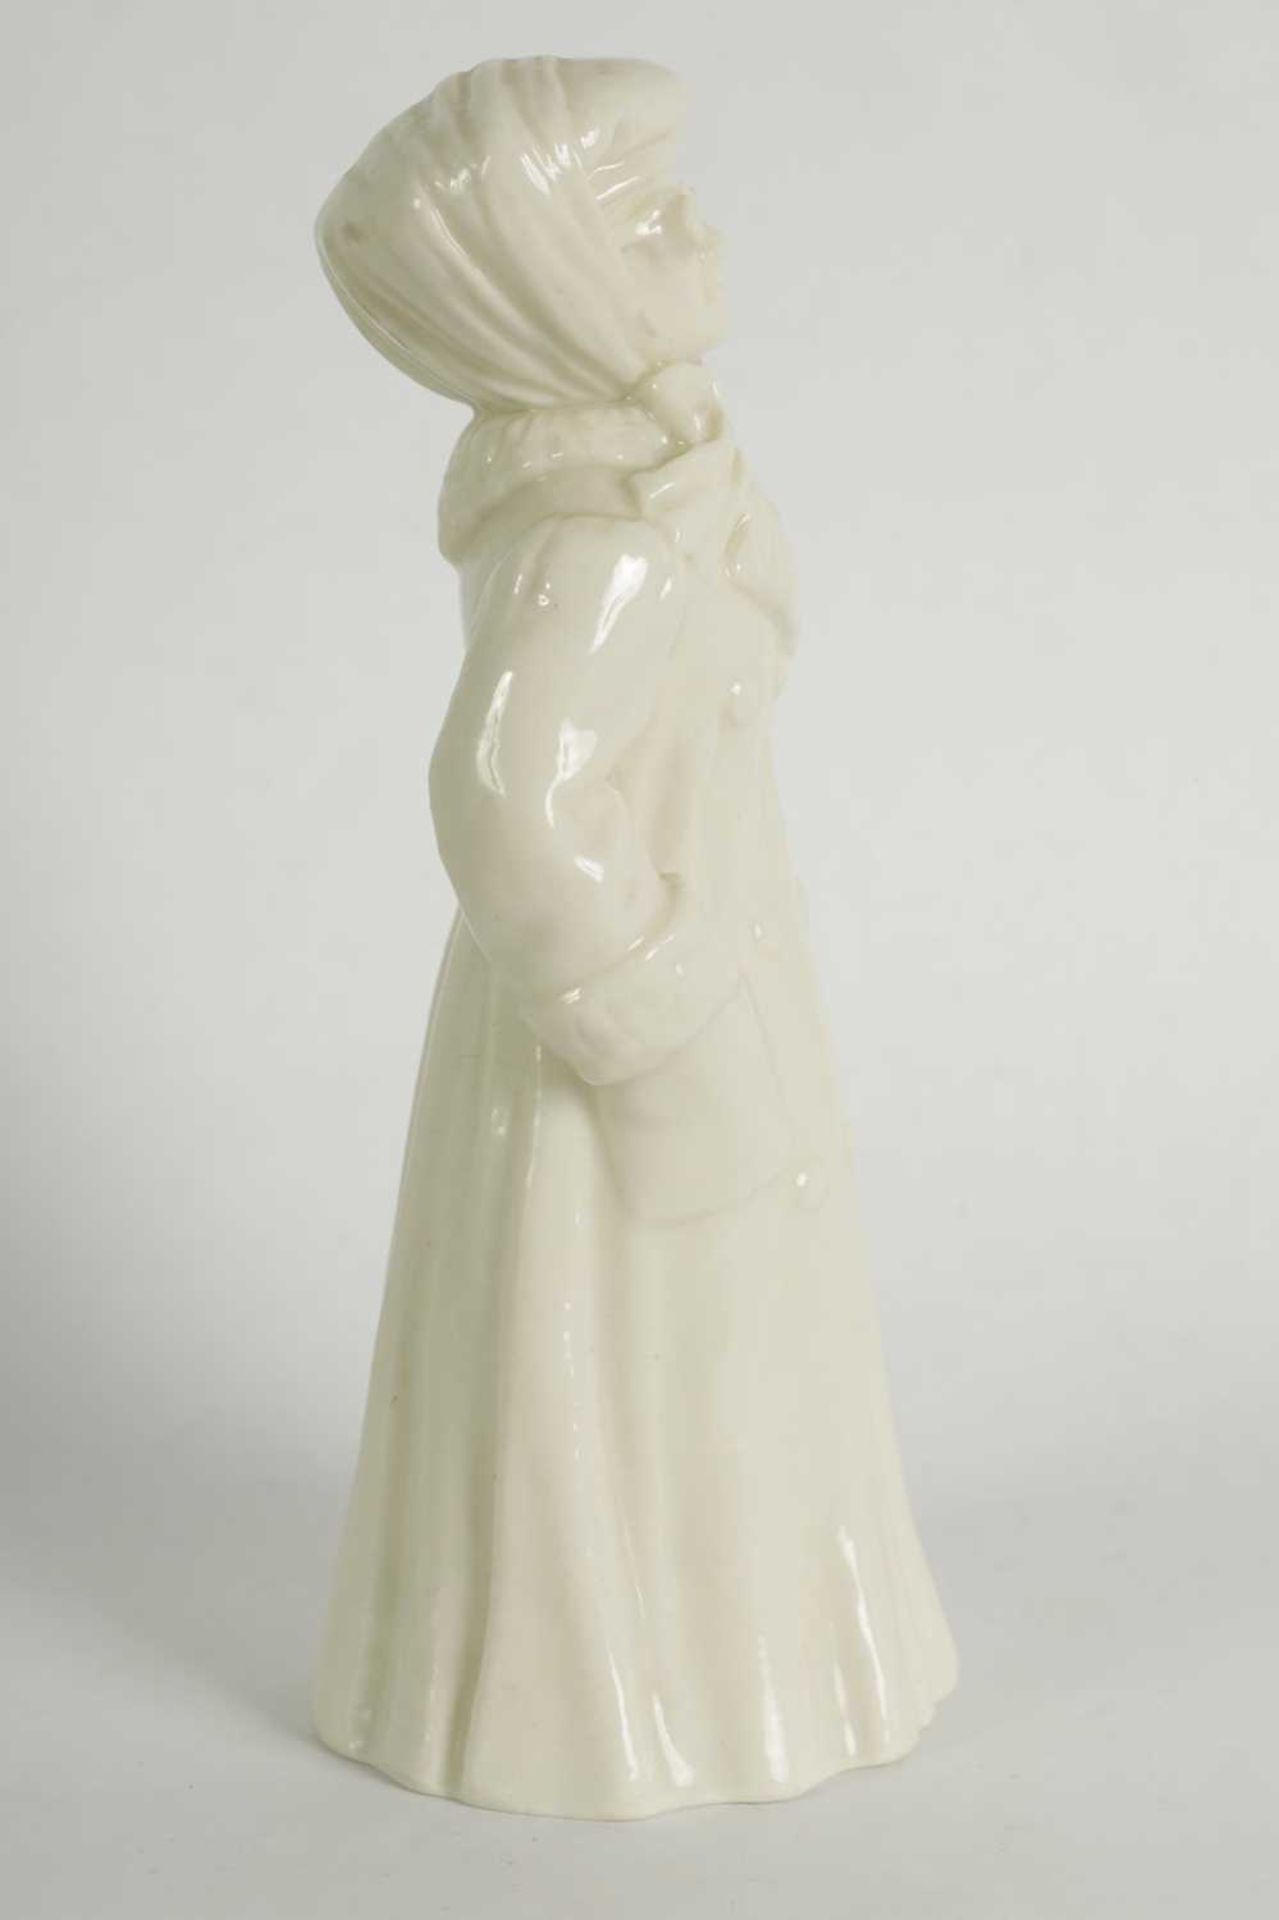 THE MOTORIST. A VERY RARE ROYAL WORCESTER PORCELAIN CANDLE EXTINGUISHER - Image 6 of 6